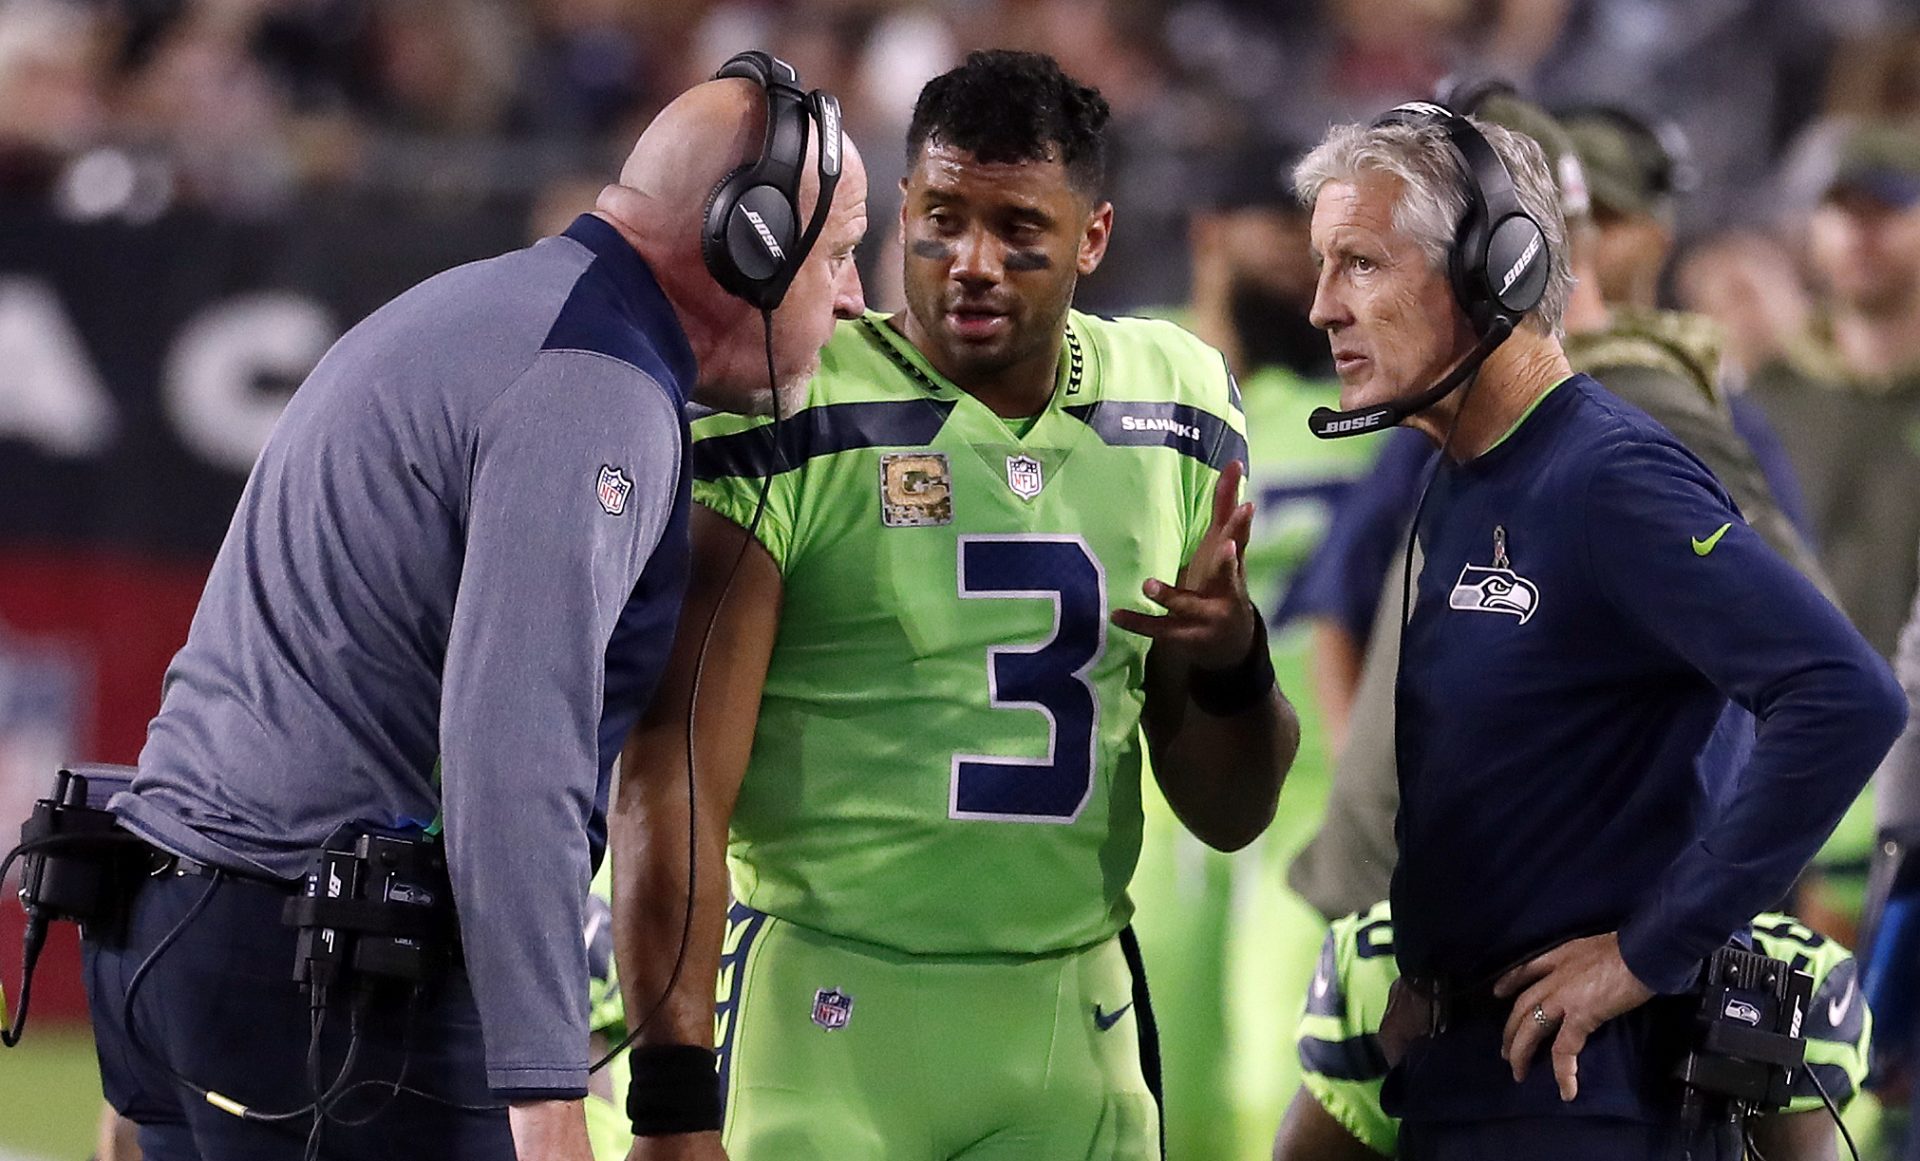 FILE - In this Thursday, Nov. 9, 2017, file photo, Seattle Seahawks quarterback Russell Wilson (3) speaks with head coach Pete Carroll, right, and assistant head coach Tom Cable during an NFL football game against the Arizona Cardinals in Glendale, Ariz. The Seahawks return to practice Tuesday, Nov. 14, 2017, without Richard Sherman and facing questions about how the team handled the concussion protocol with quarterback Russell Wilson.